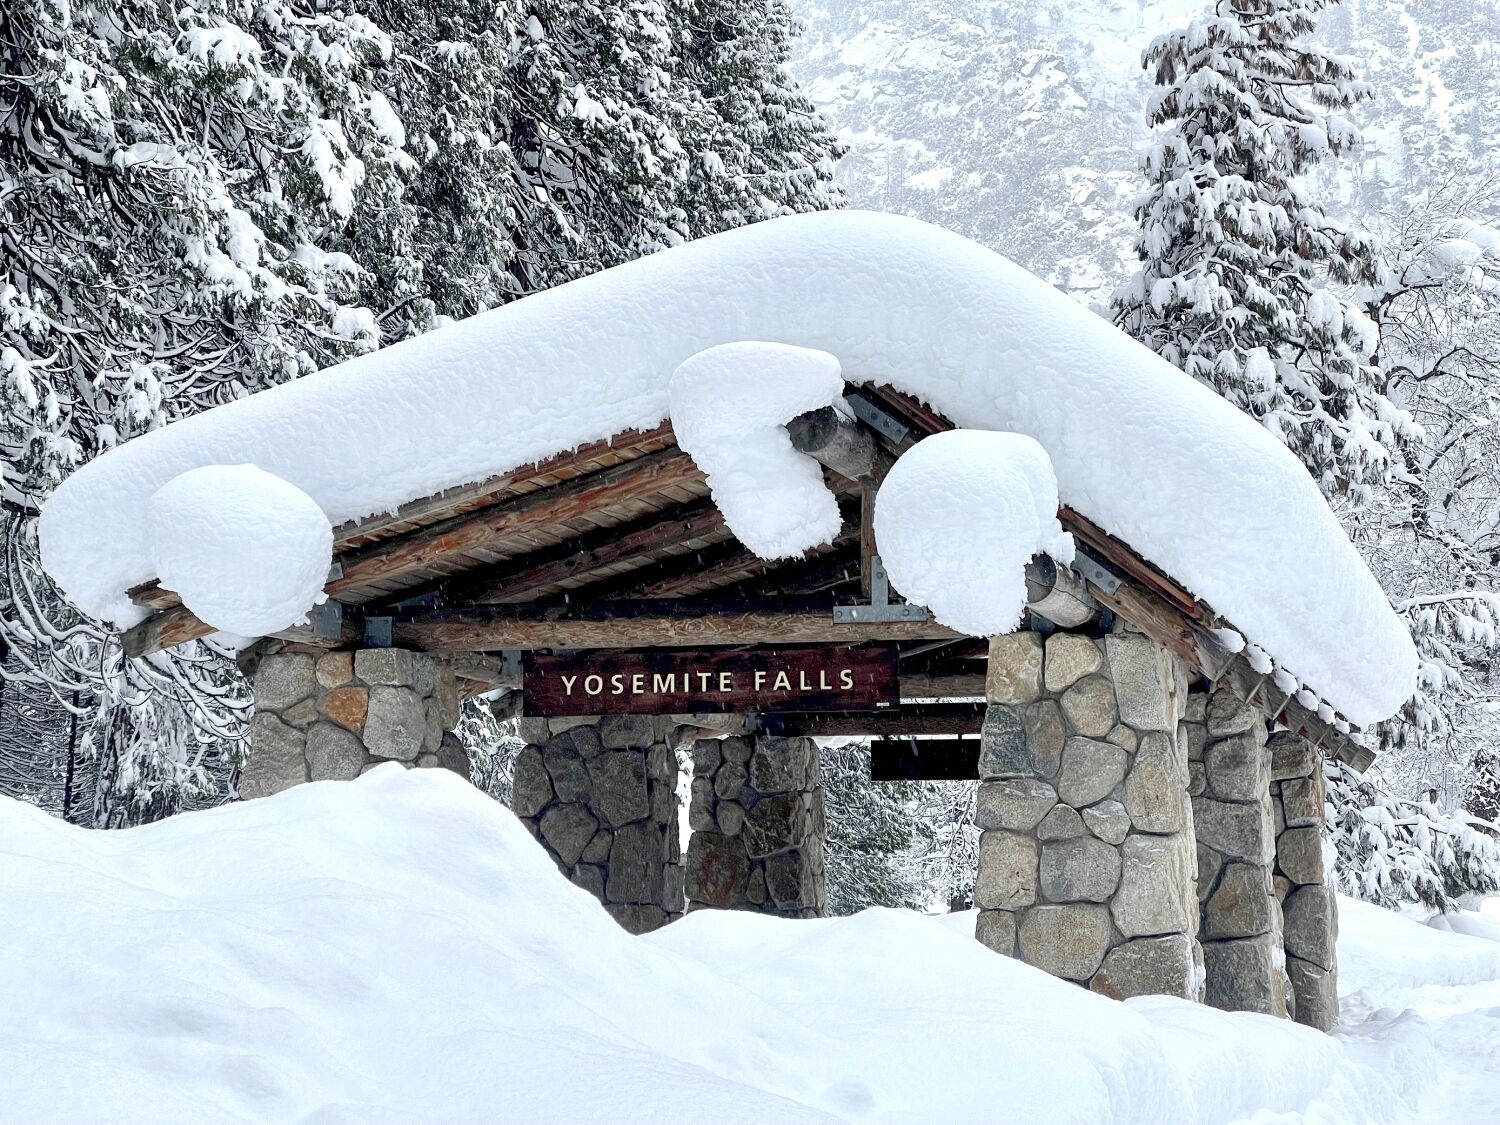 Historic snowfall means Yosemite will remain closed through weekend, perhaps longer